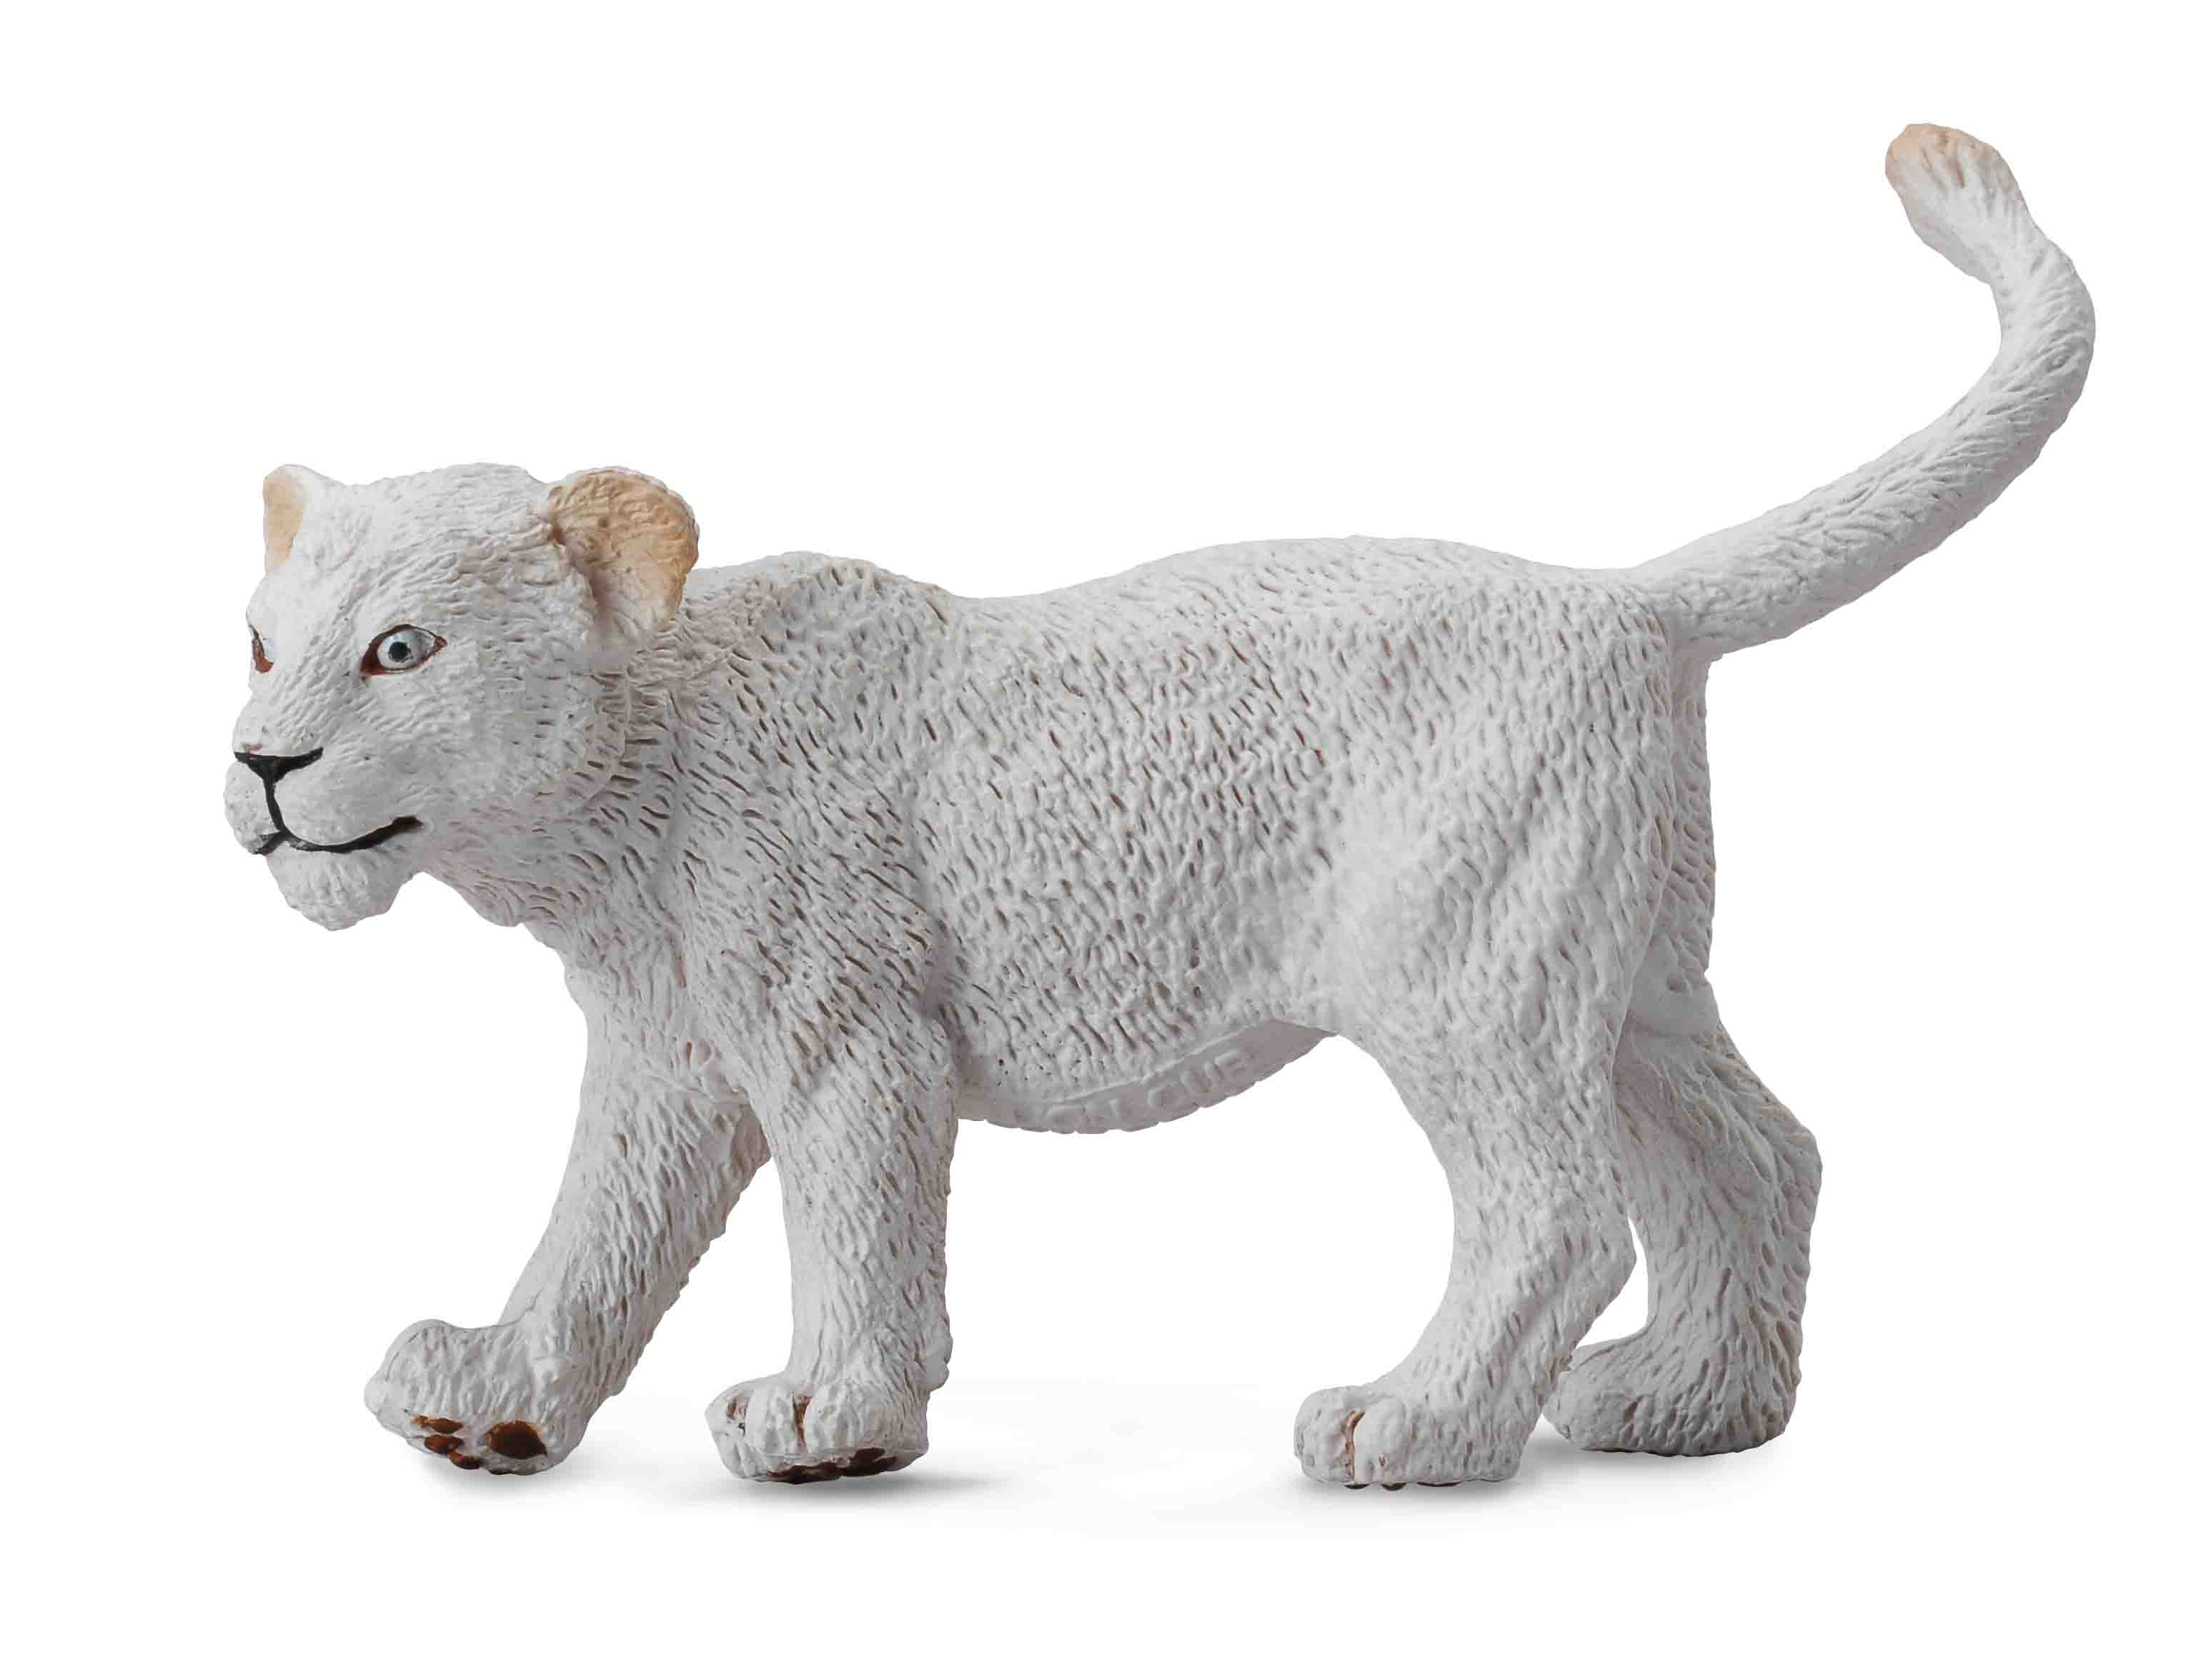 White Lion Cub - Walking - Collecta Figures: Animal Toys, Dinosaurs, Farm,  Wild, Sea, Insect, Horses, Prehistoric, Woodlands, Dogs, Cats, Animal  Replica